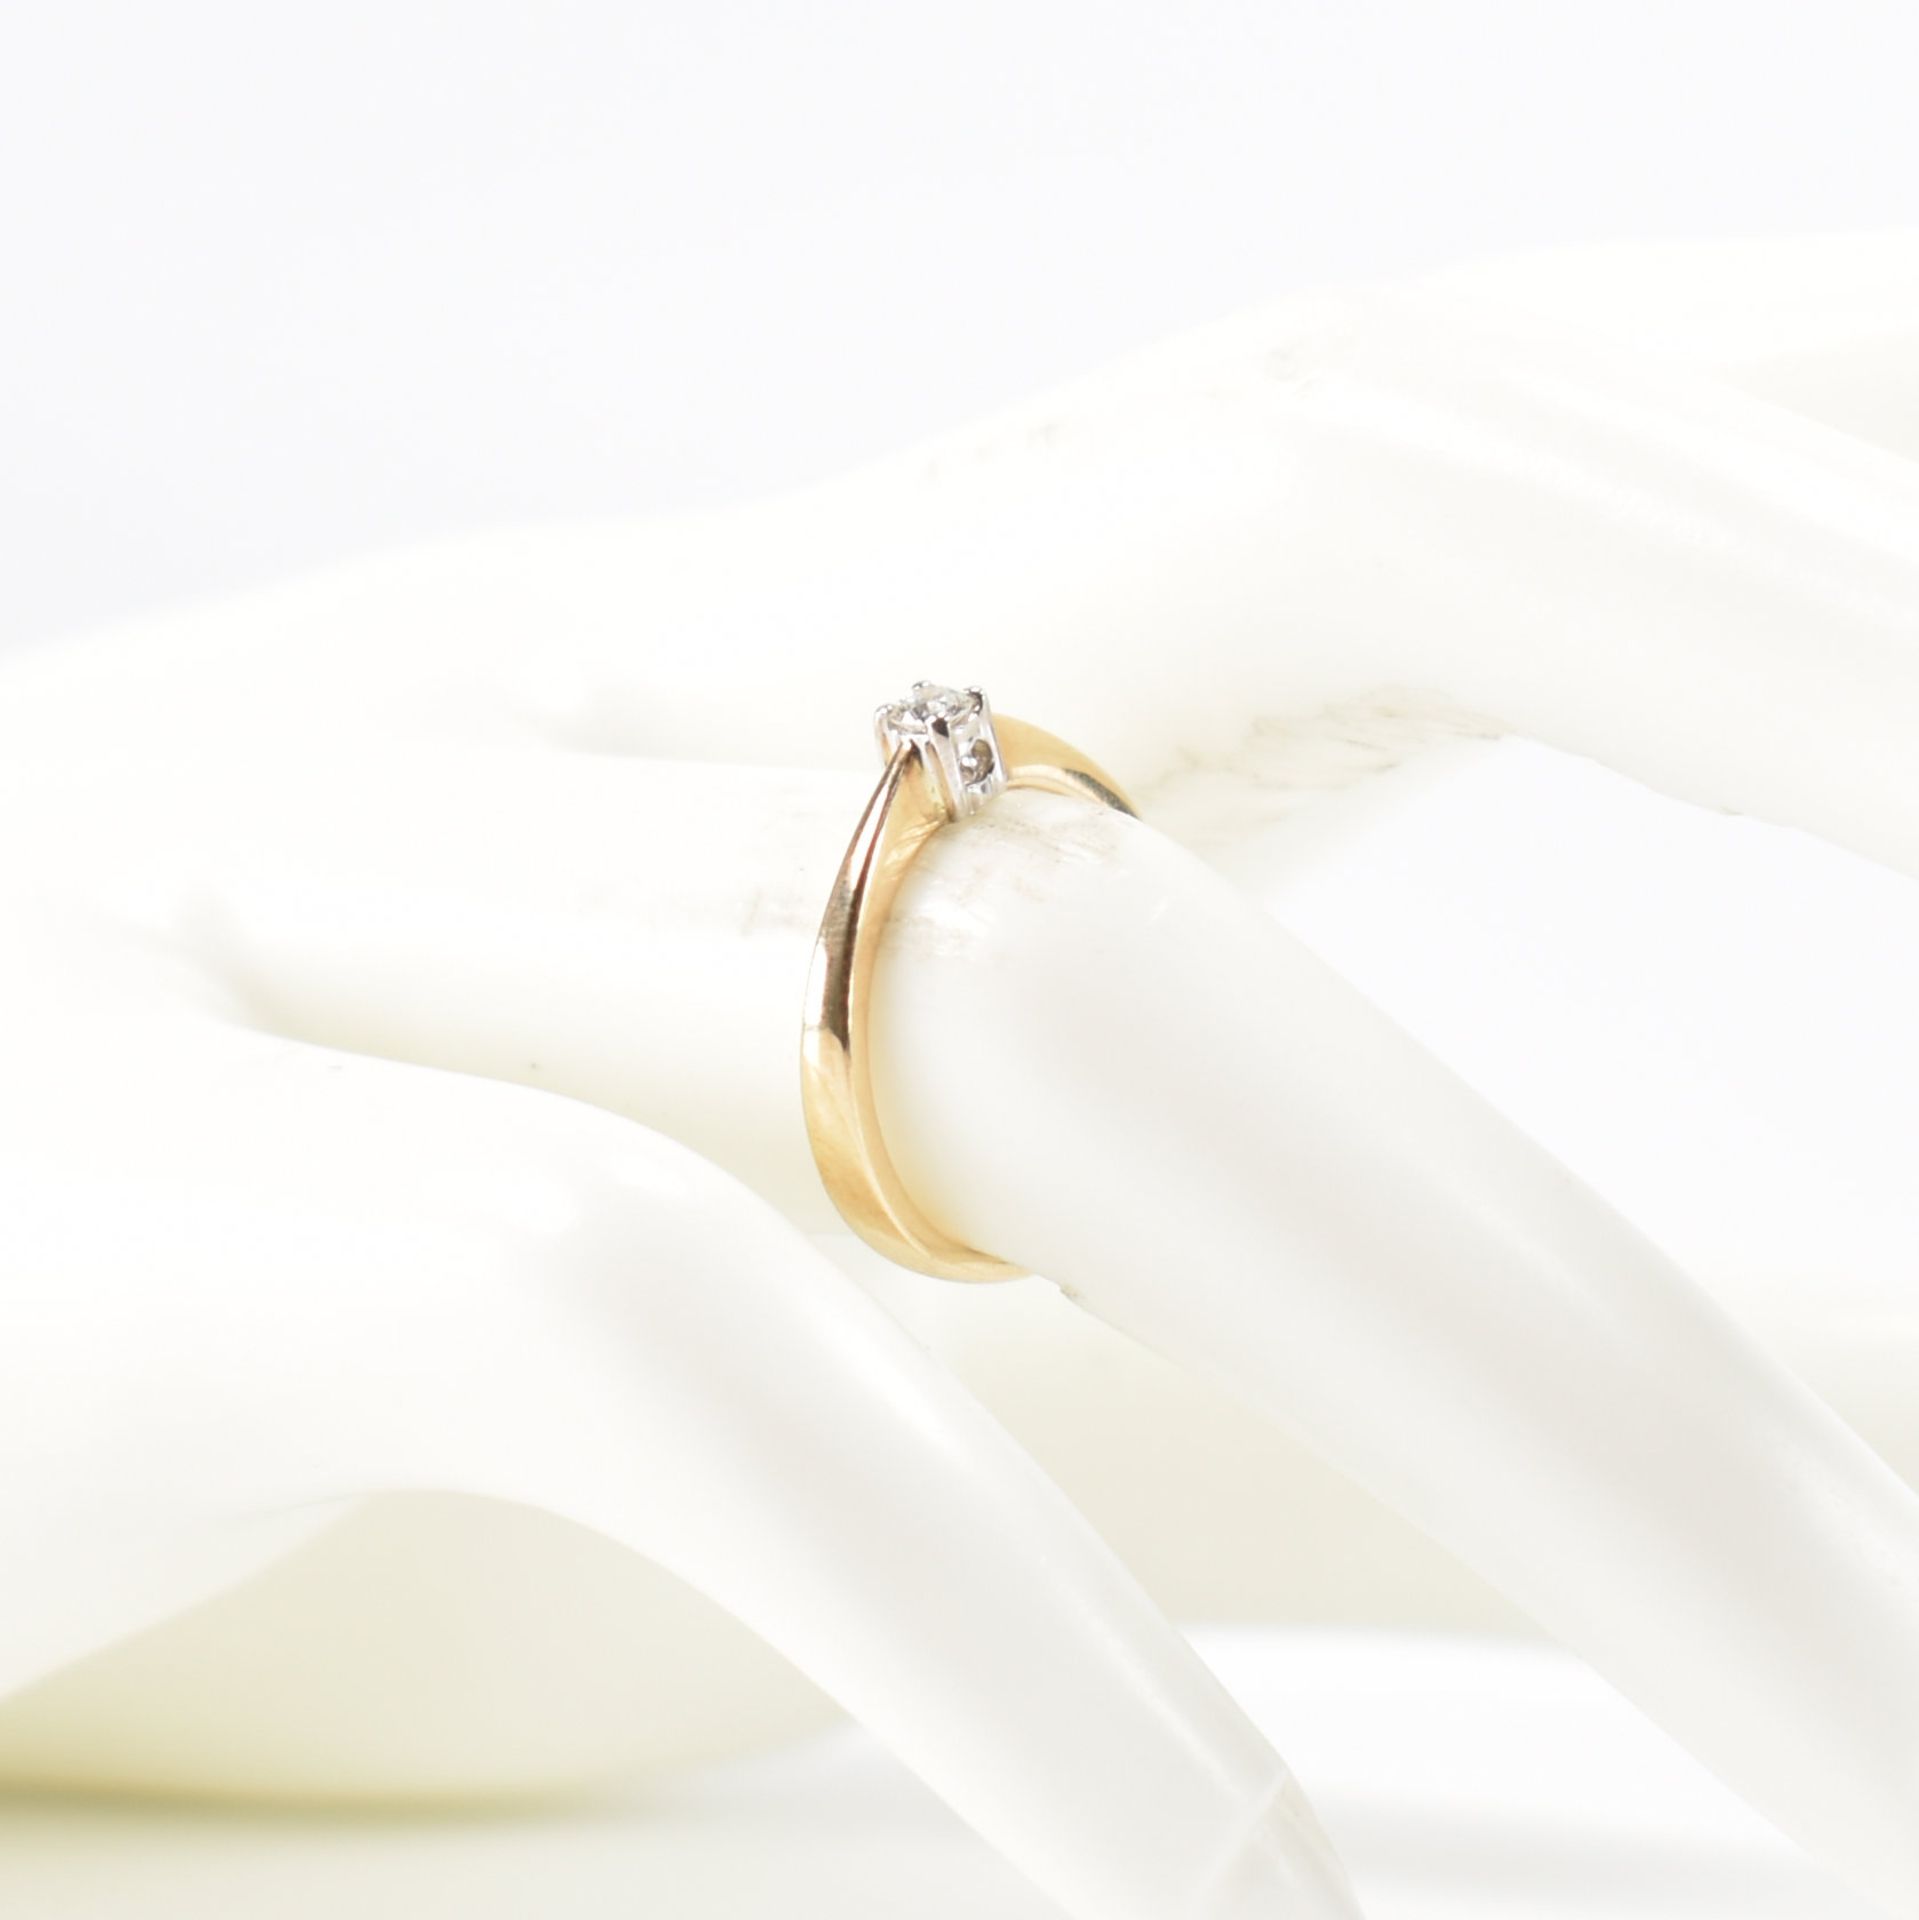 HALLMARKED 9CT GOLD DIAMOND SOLITAIRE RING - Image 7 of 7